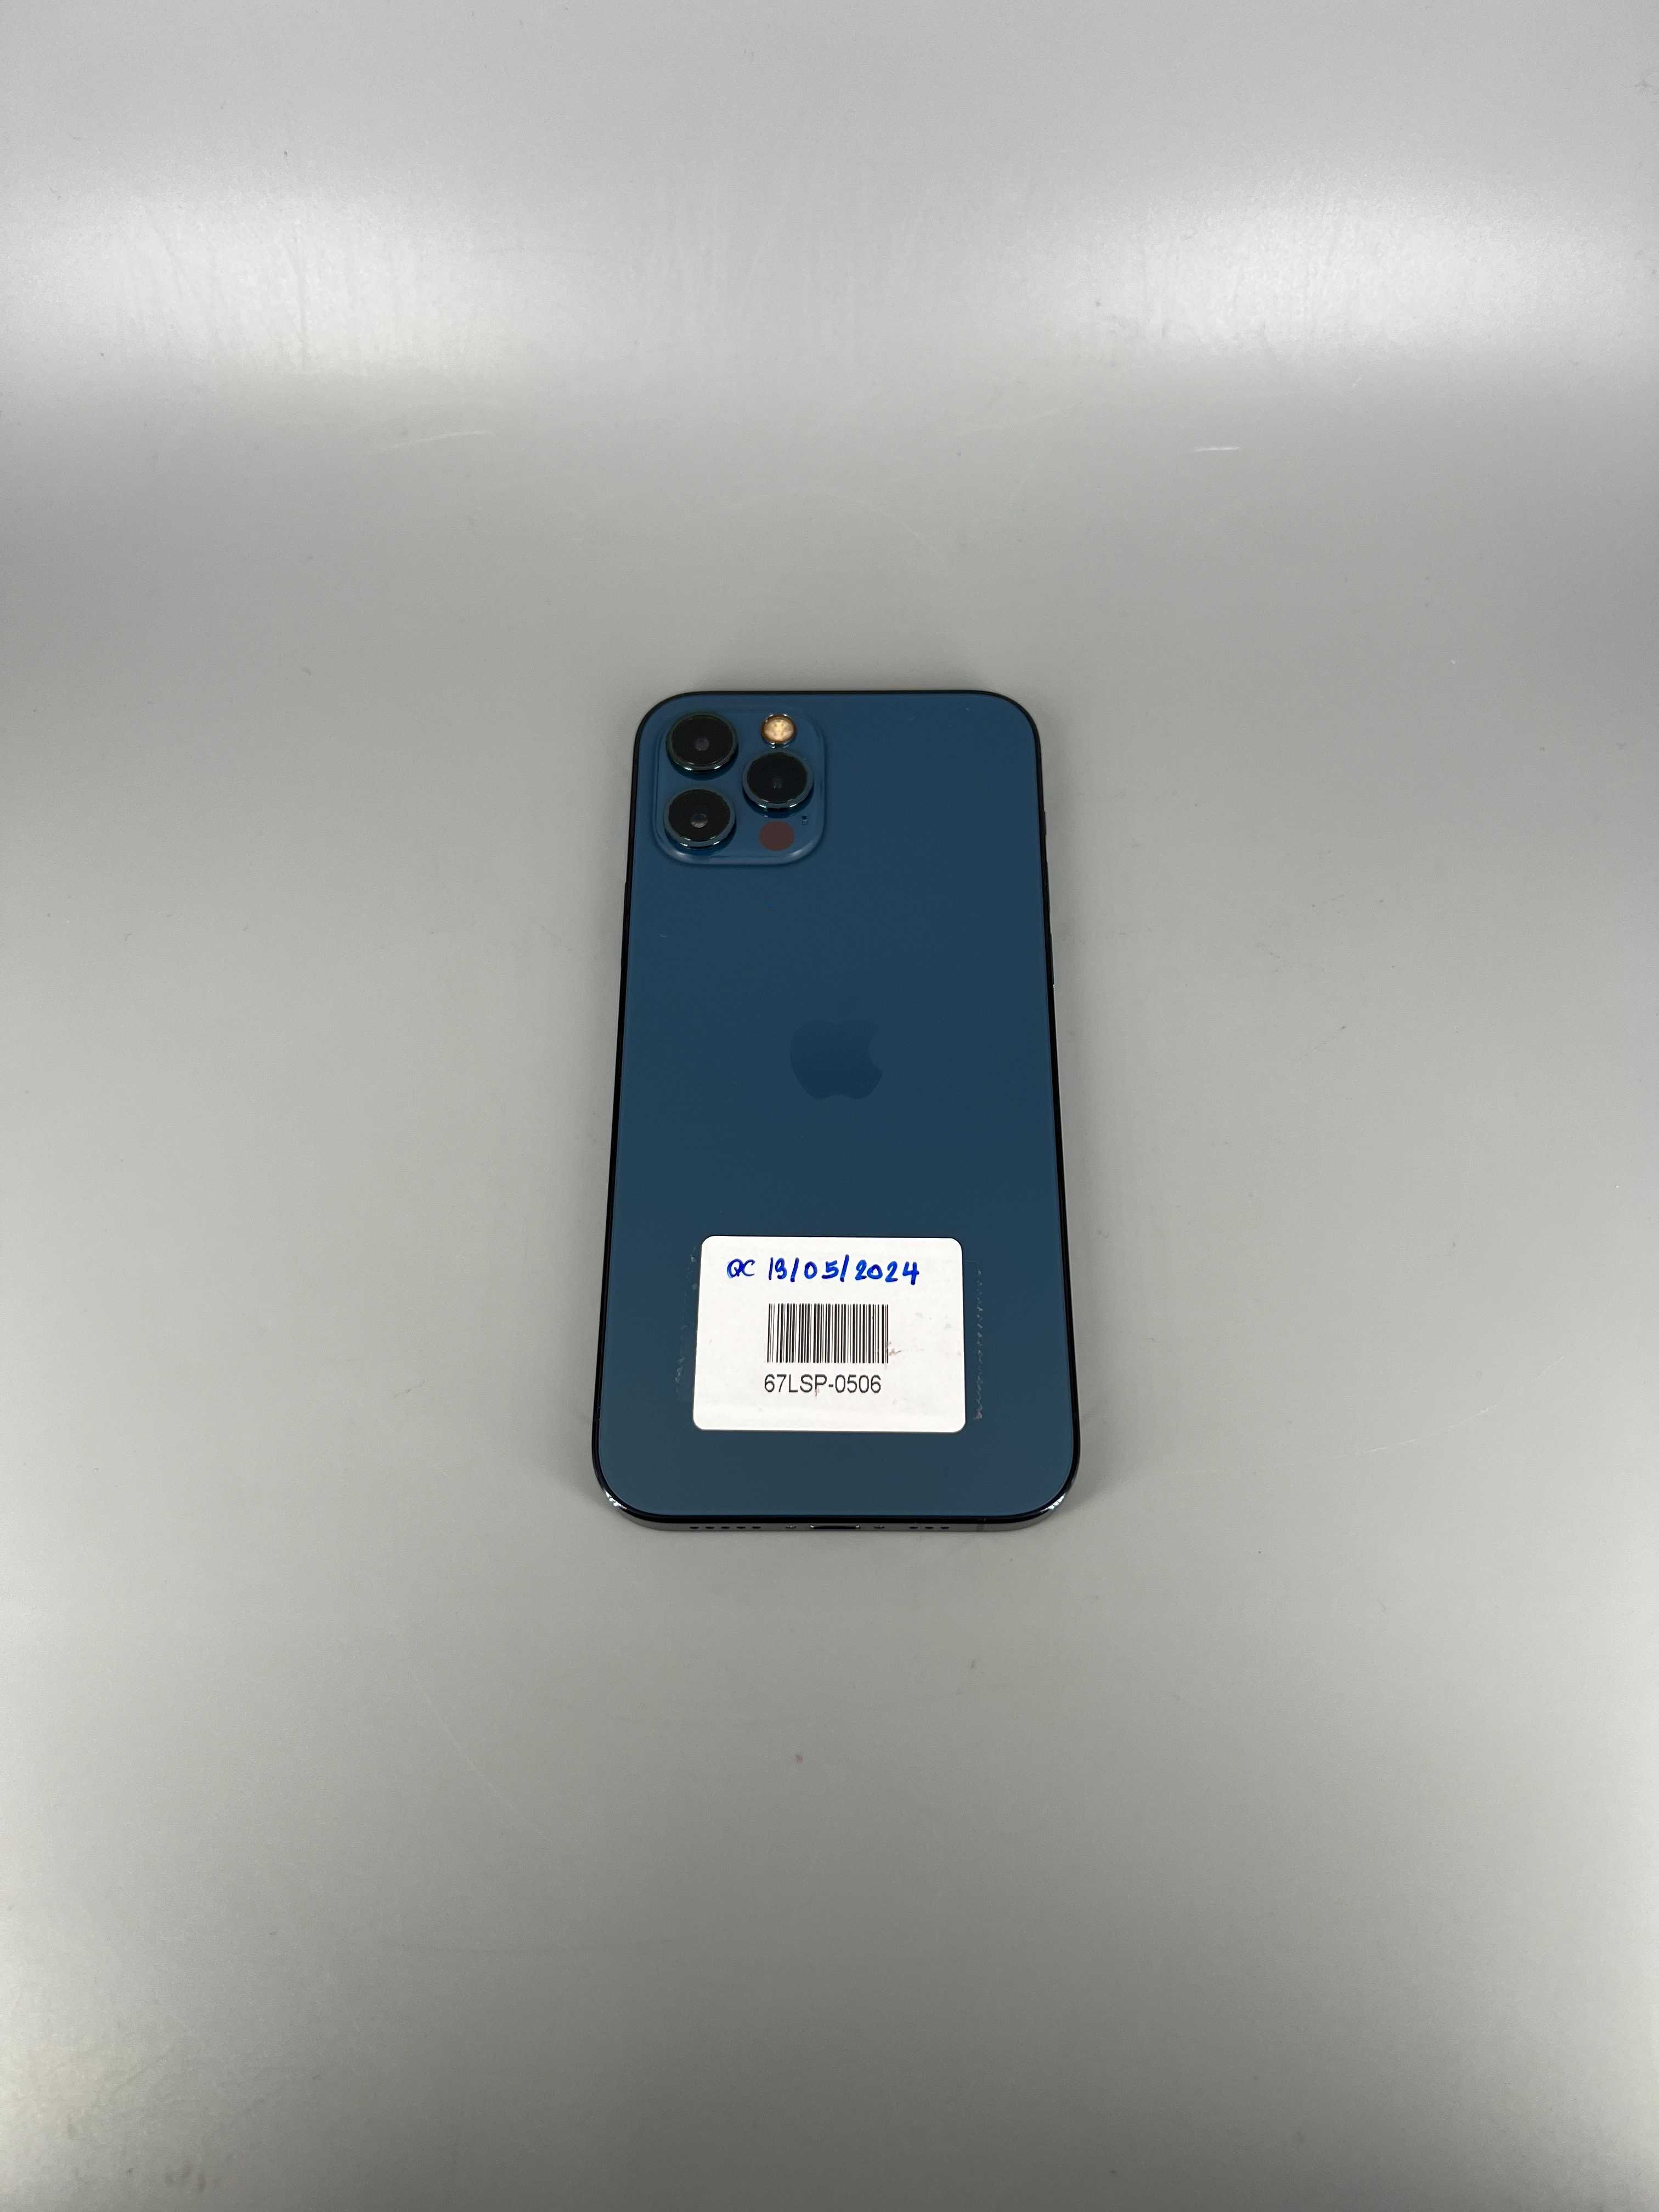 Used iPhone 12 Pro 128GB Pacific Blue 67LSP-0506